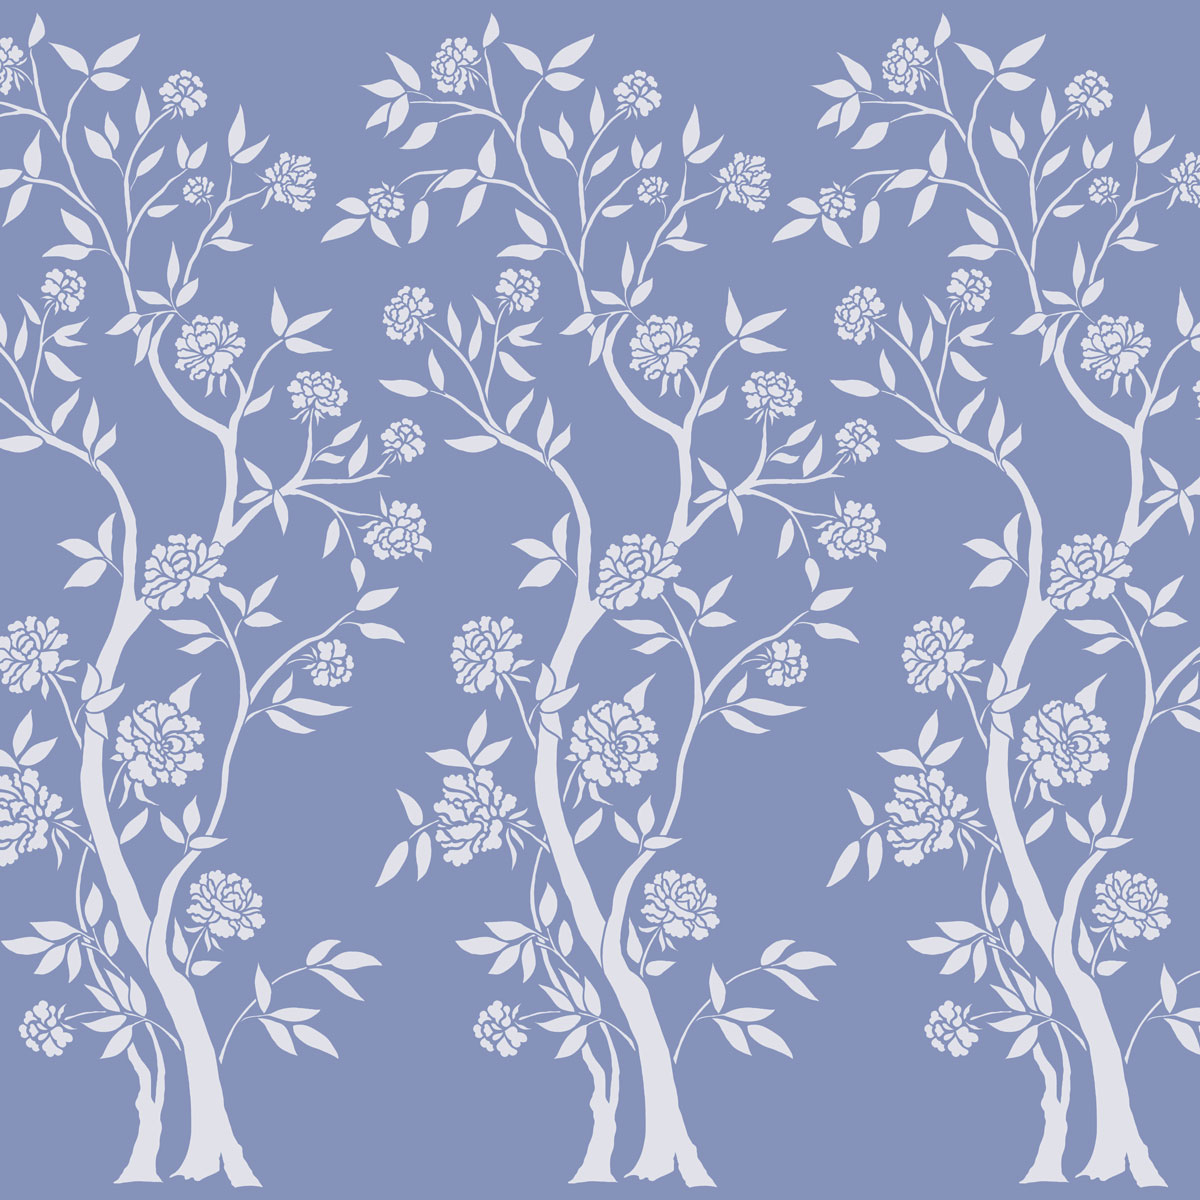 Avian Chinoiserie Wall Mural Stencil - Floral Stencils for Walls